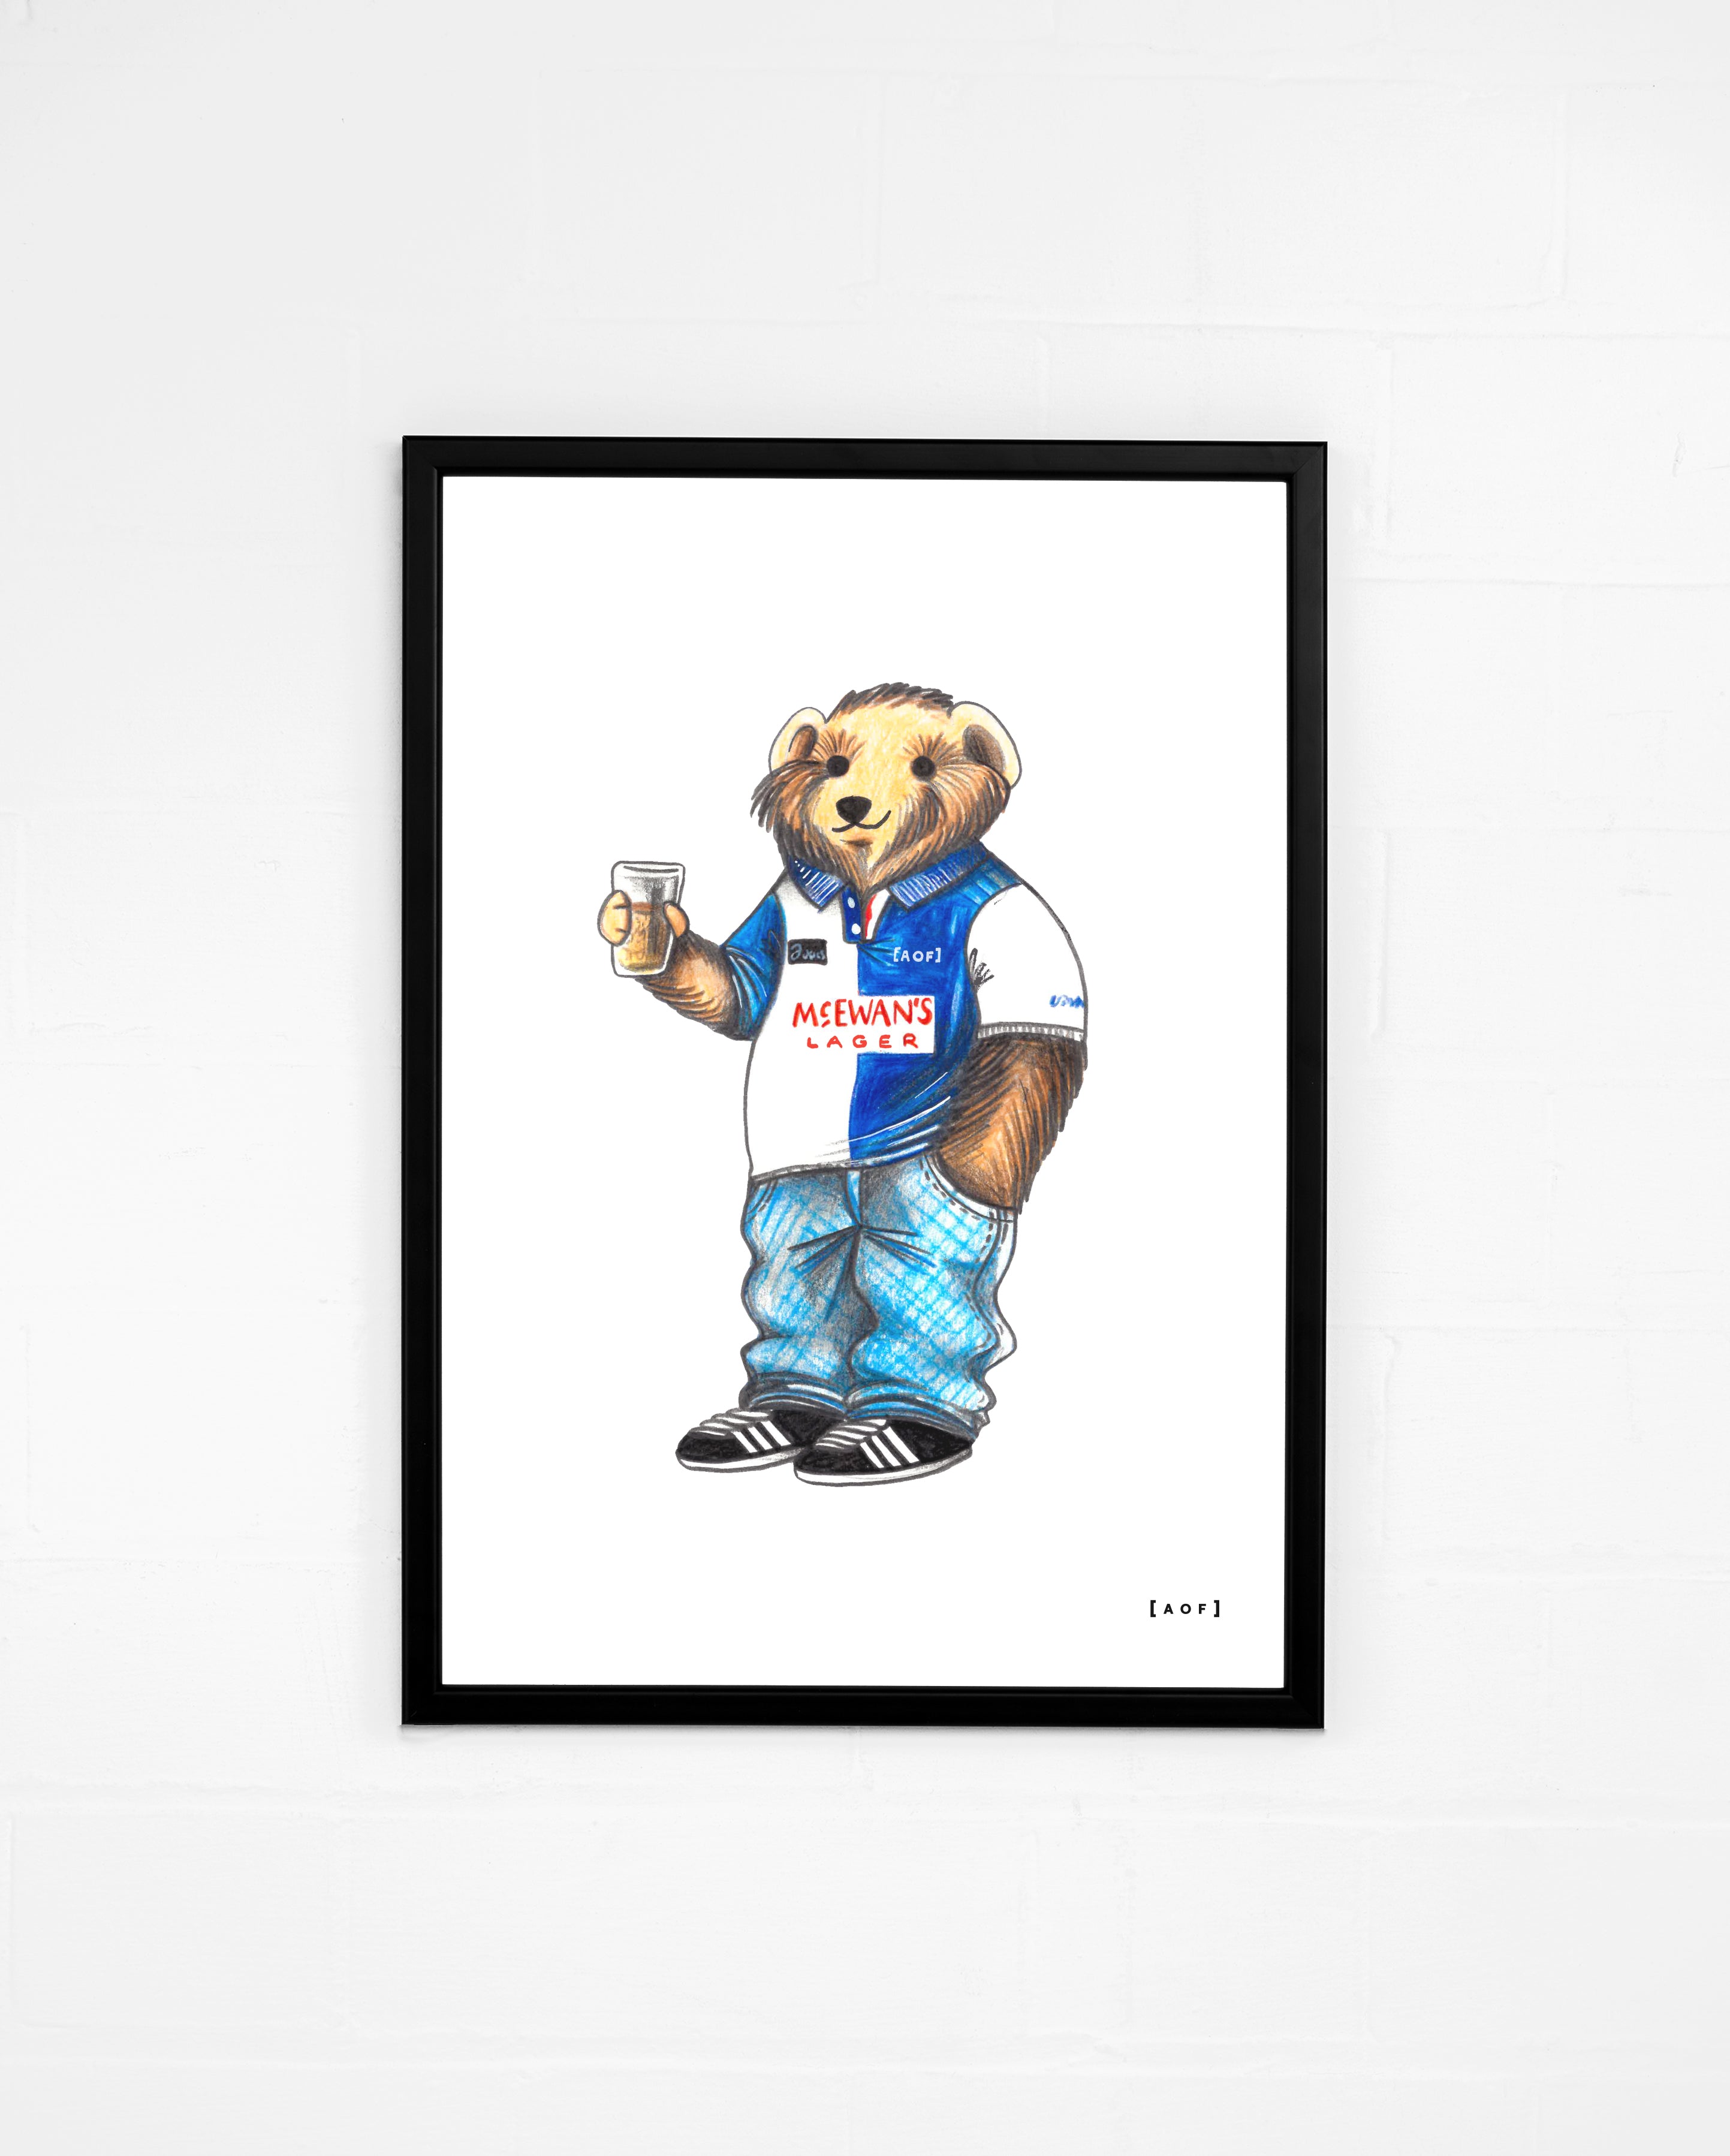 Rovers Pickles - Print